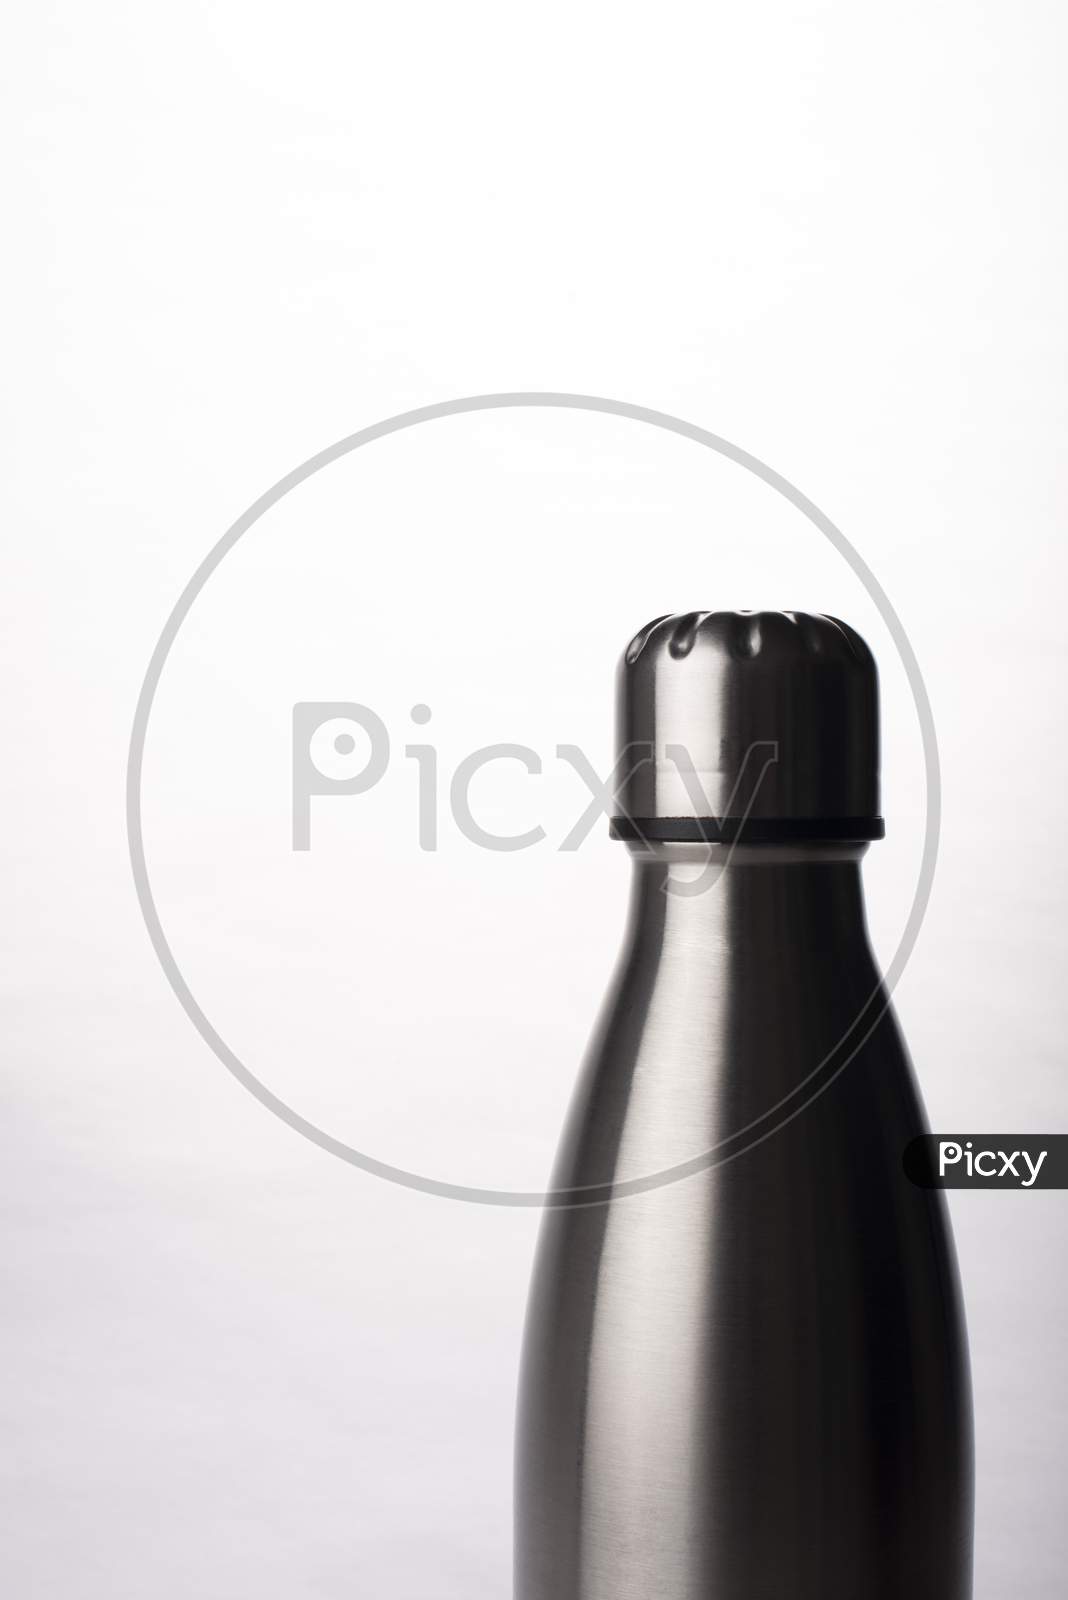 Metal Water Bottle On White Background, Stainless Steel Flask